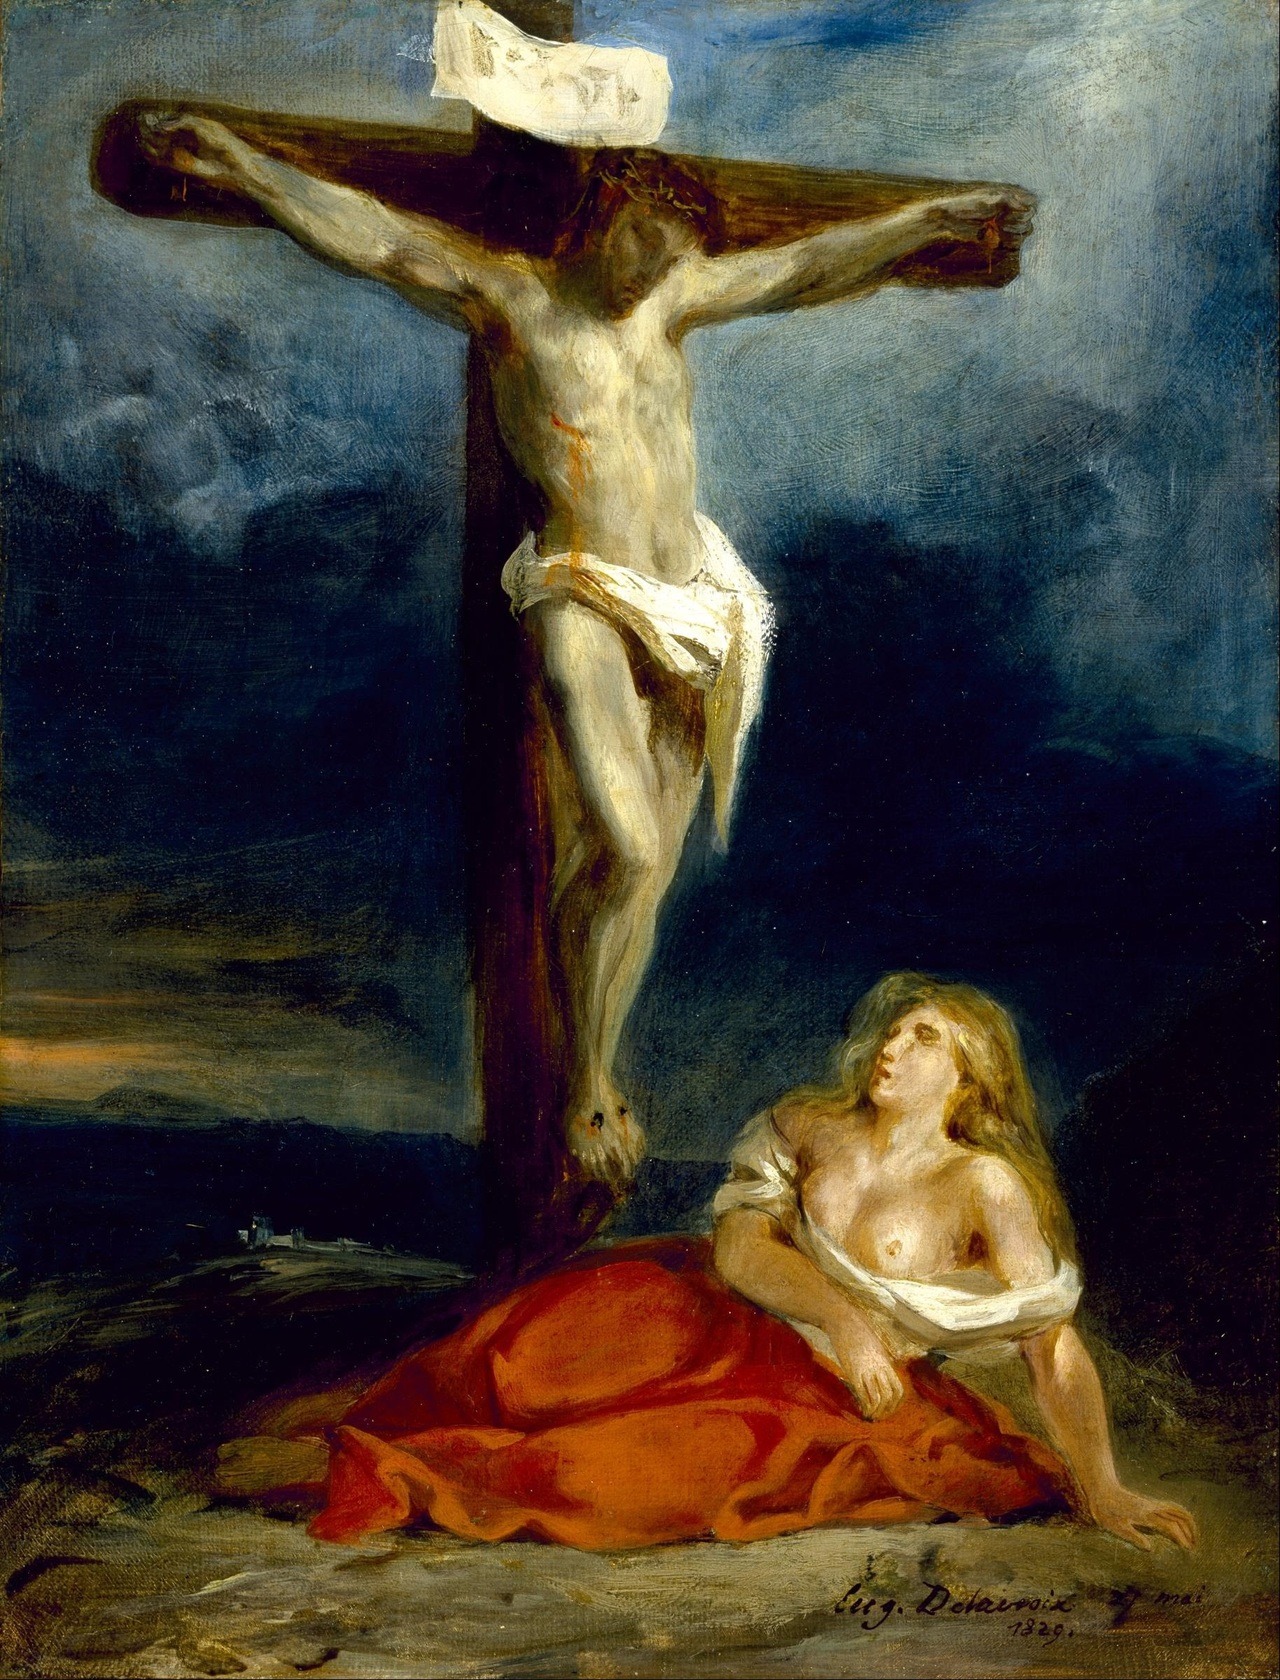 Saint Mary Magdalene at the Foot of the Cross by EugÃ¨ne Delacroix, 1829